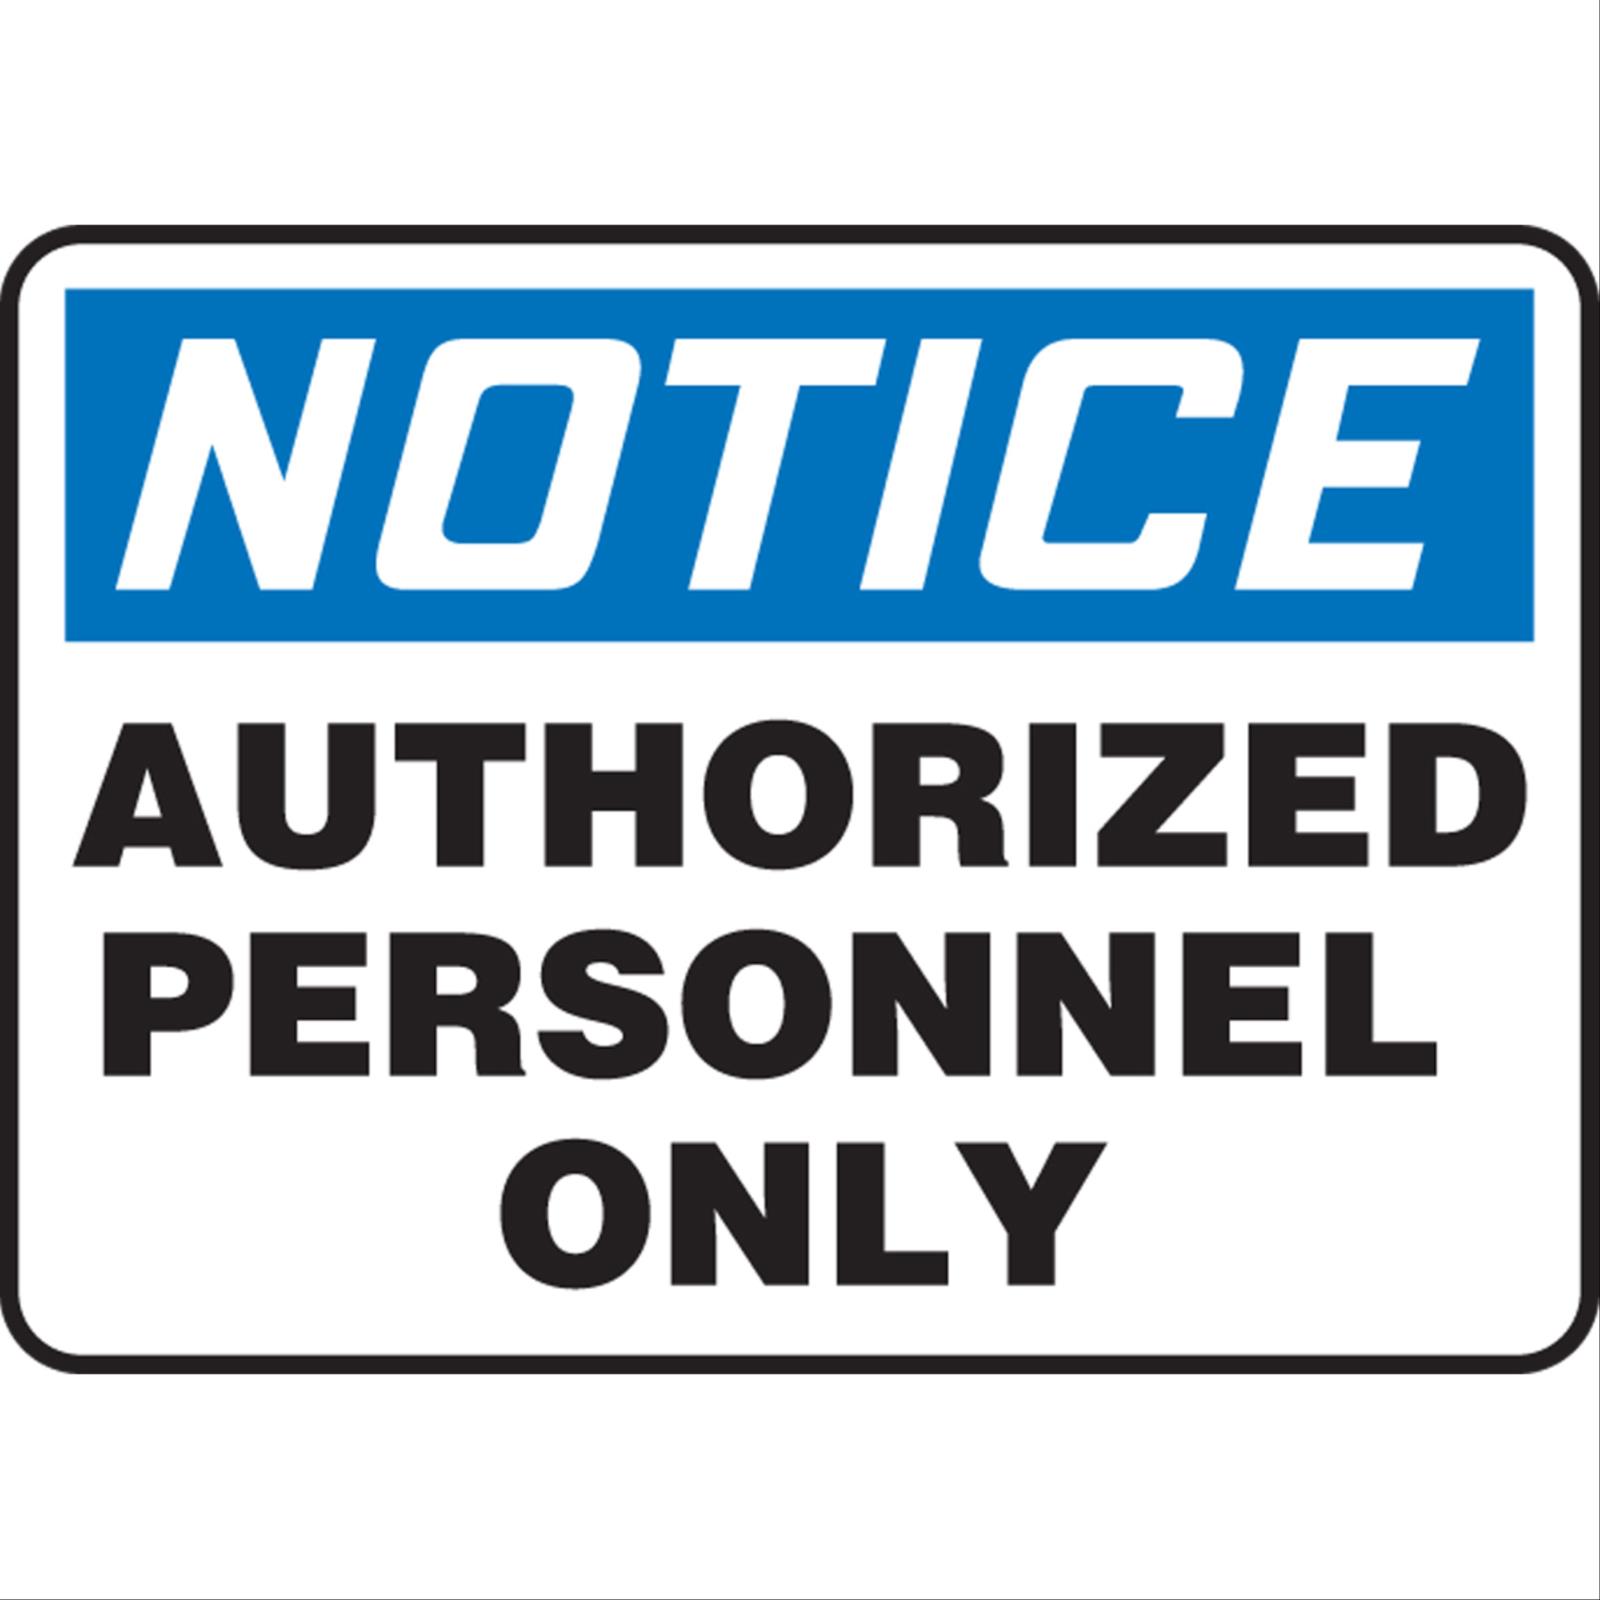 Notice Authorized Personnel Only SIgns